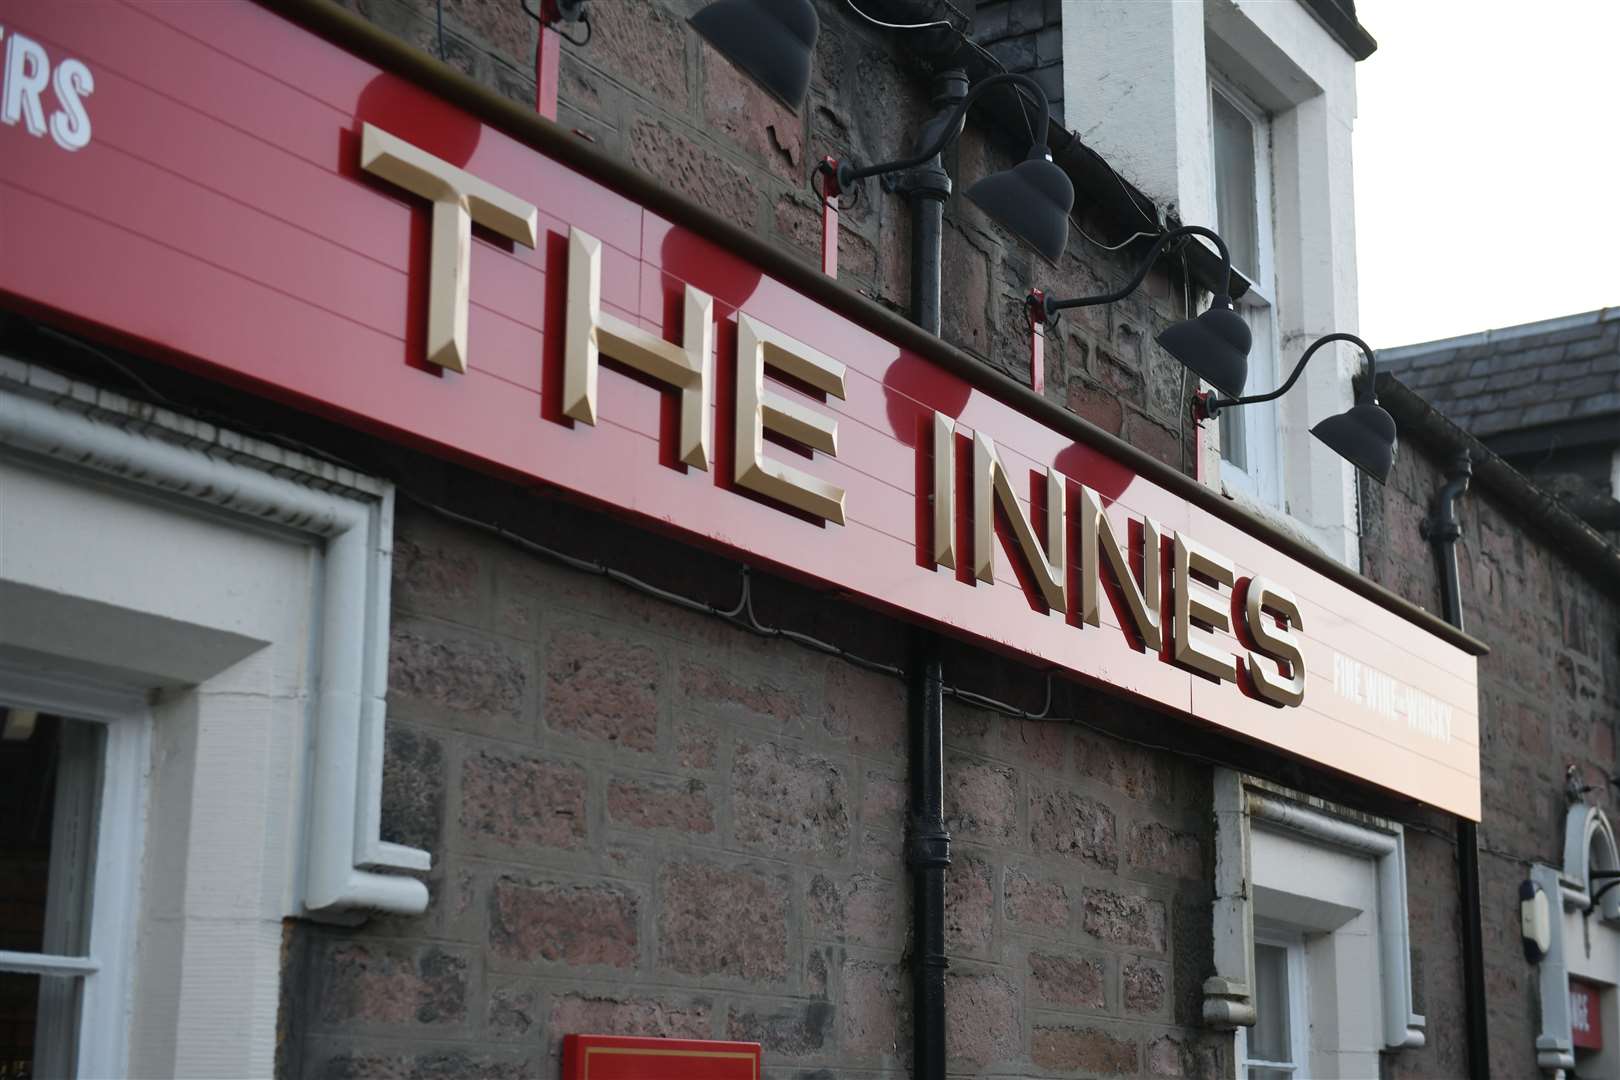 The open meeting is taking place at The Innes Bar on Saturday.